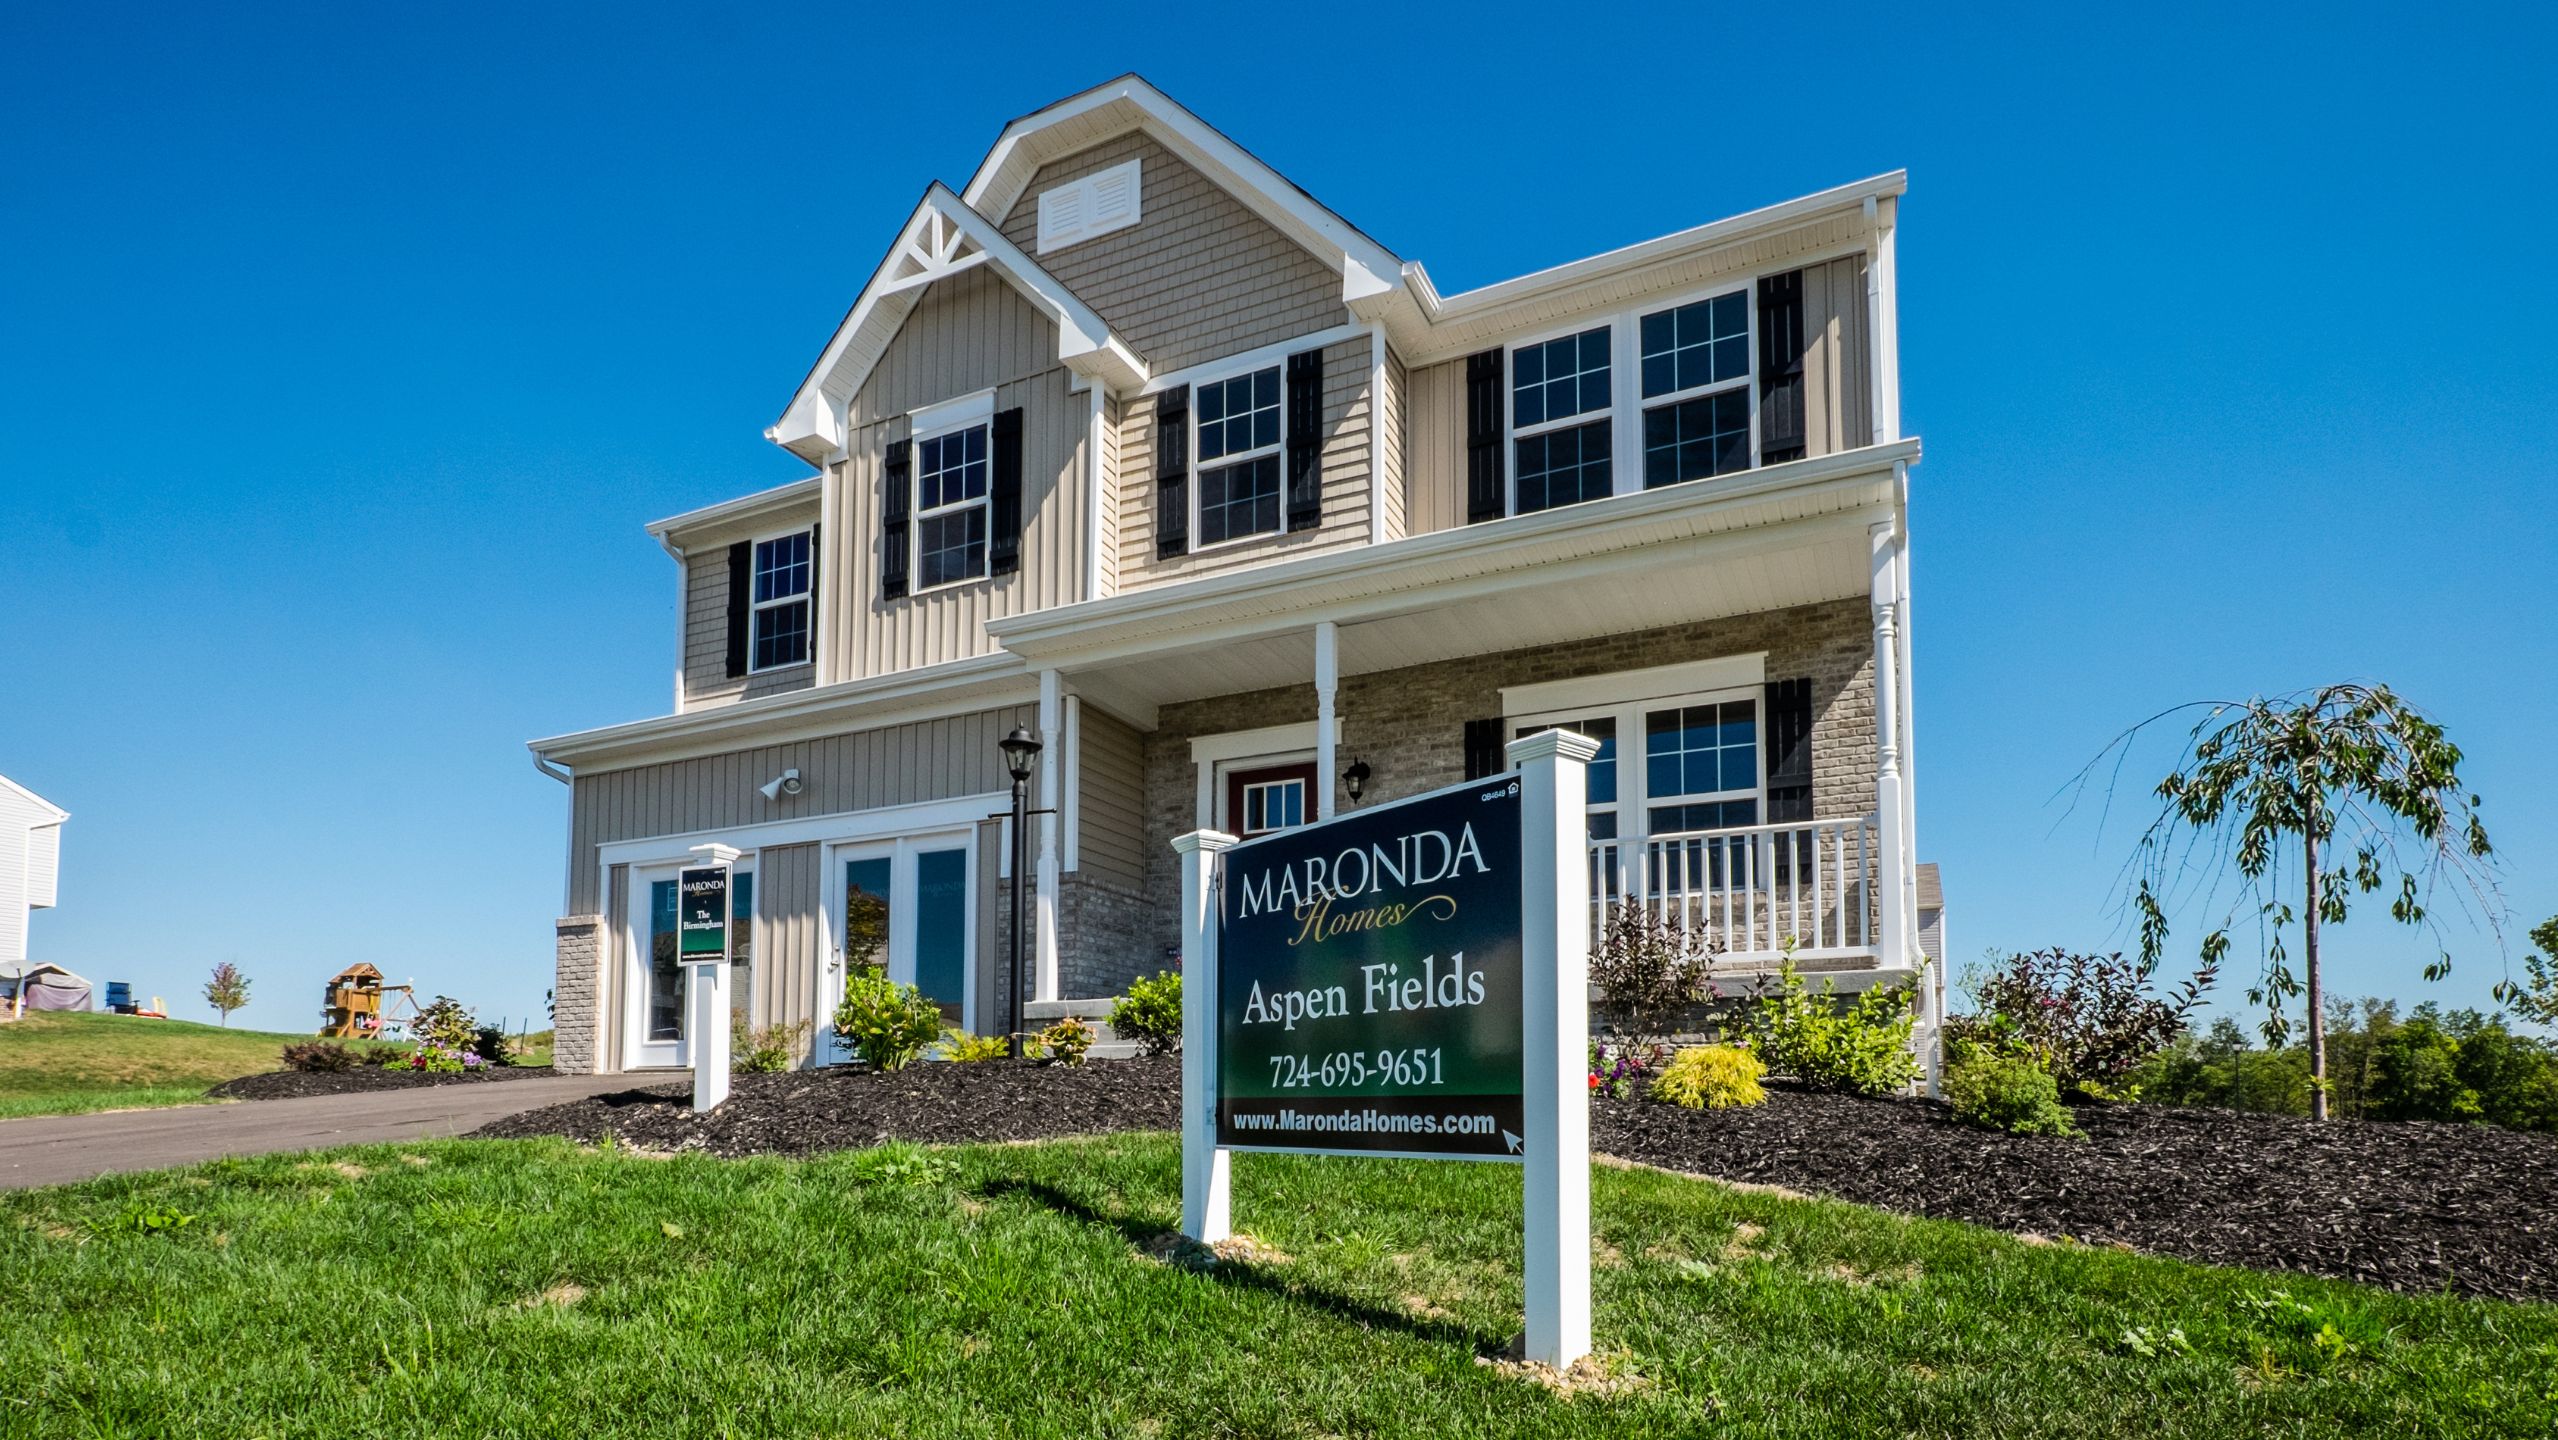 A new model home available in Beaver, PA